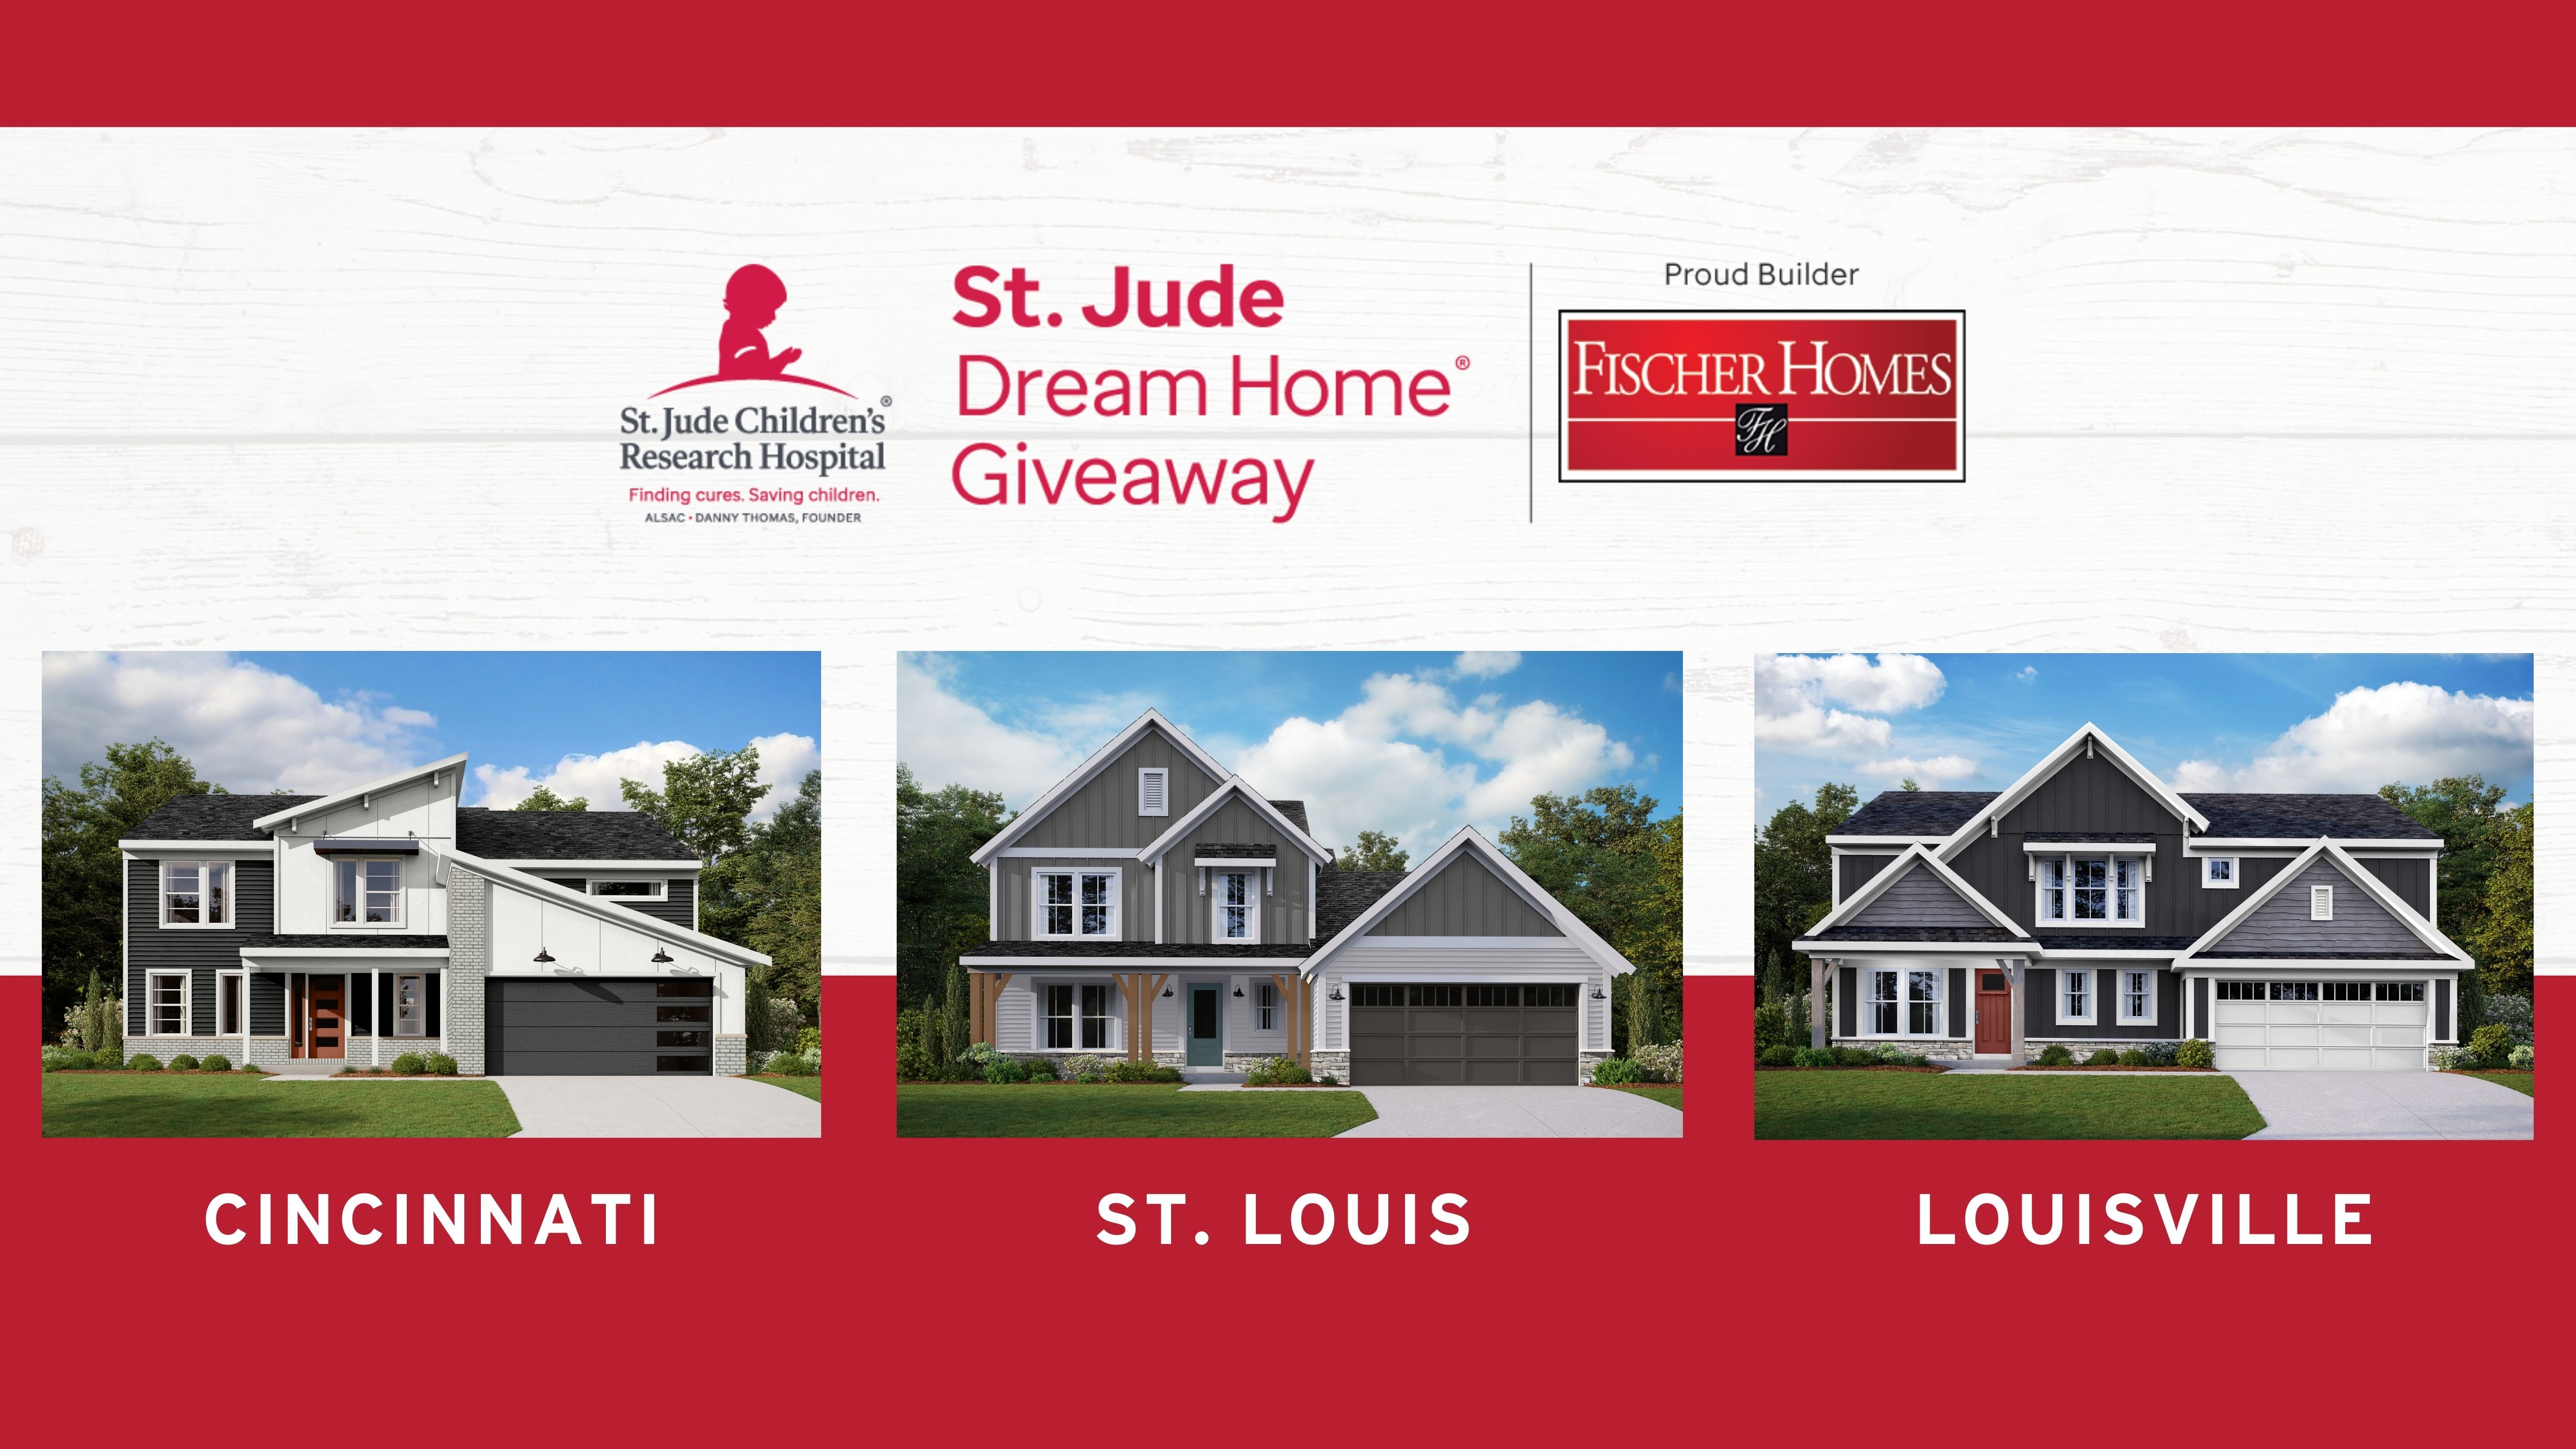 Fischer Homes First to Build Three Homes in One Year for St. Jude